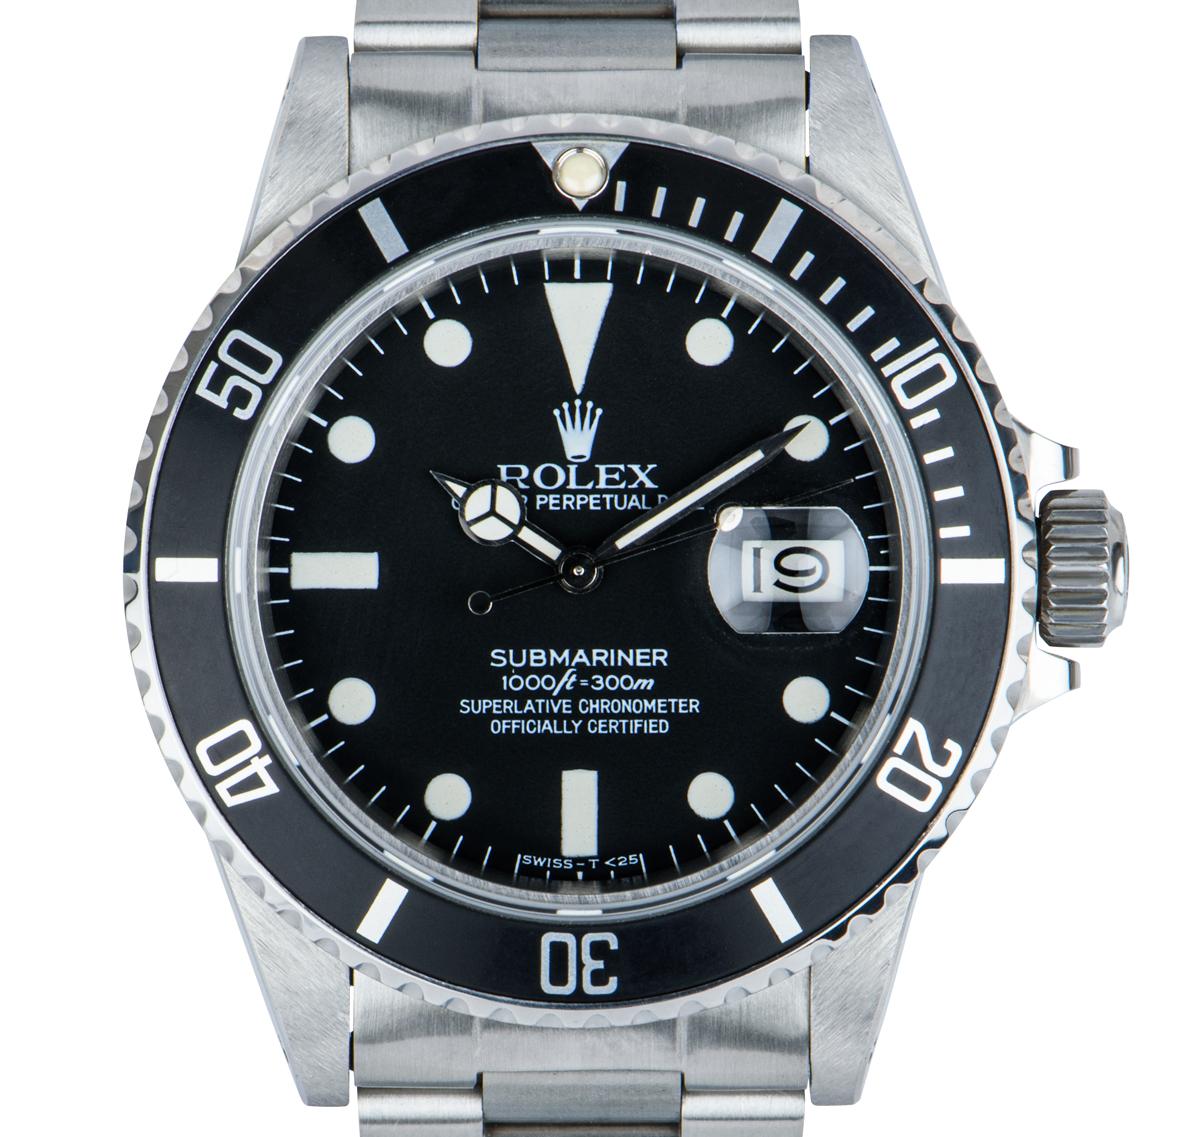 A 40mm vintage transitional Submariner Date crafted in stainless steel by Rolex. Features a matte black dial with a unidirectional rotating bezel and a black 60-minute graduation bezel insert. Fitted with a sapphire crystal, a self-winding automatic